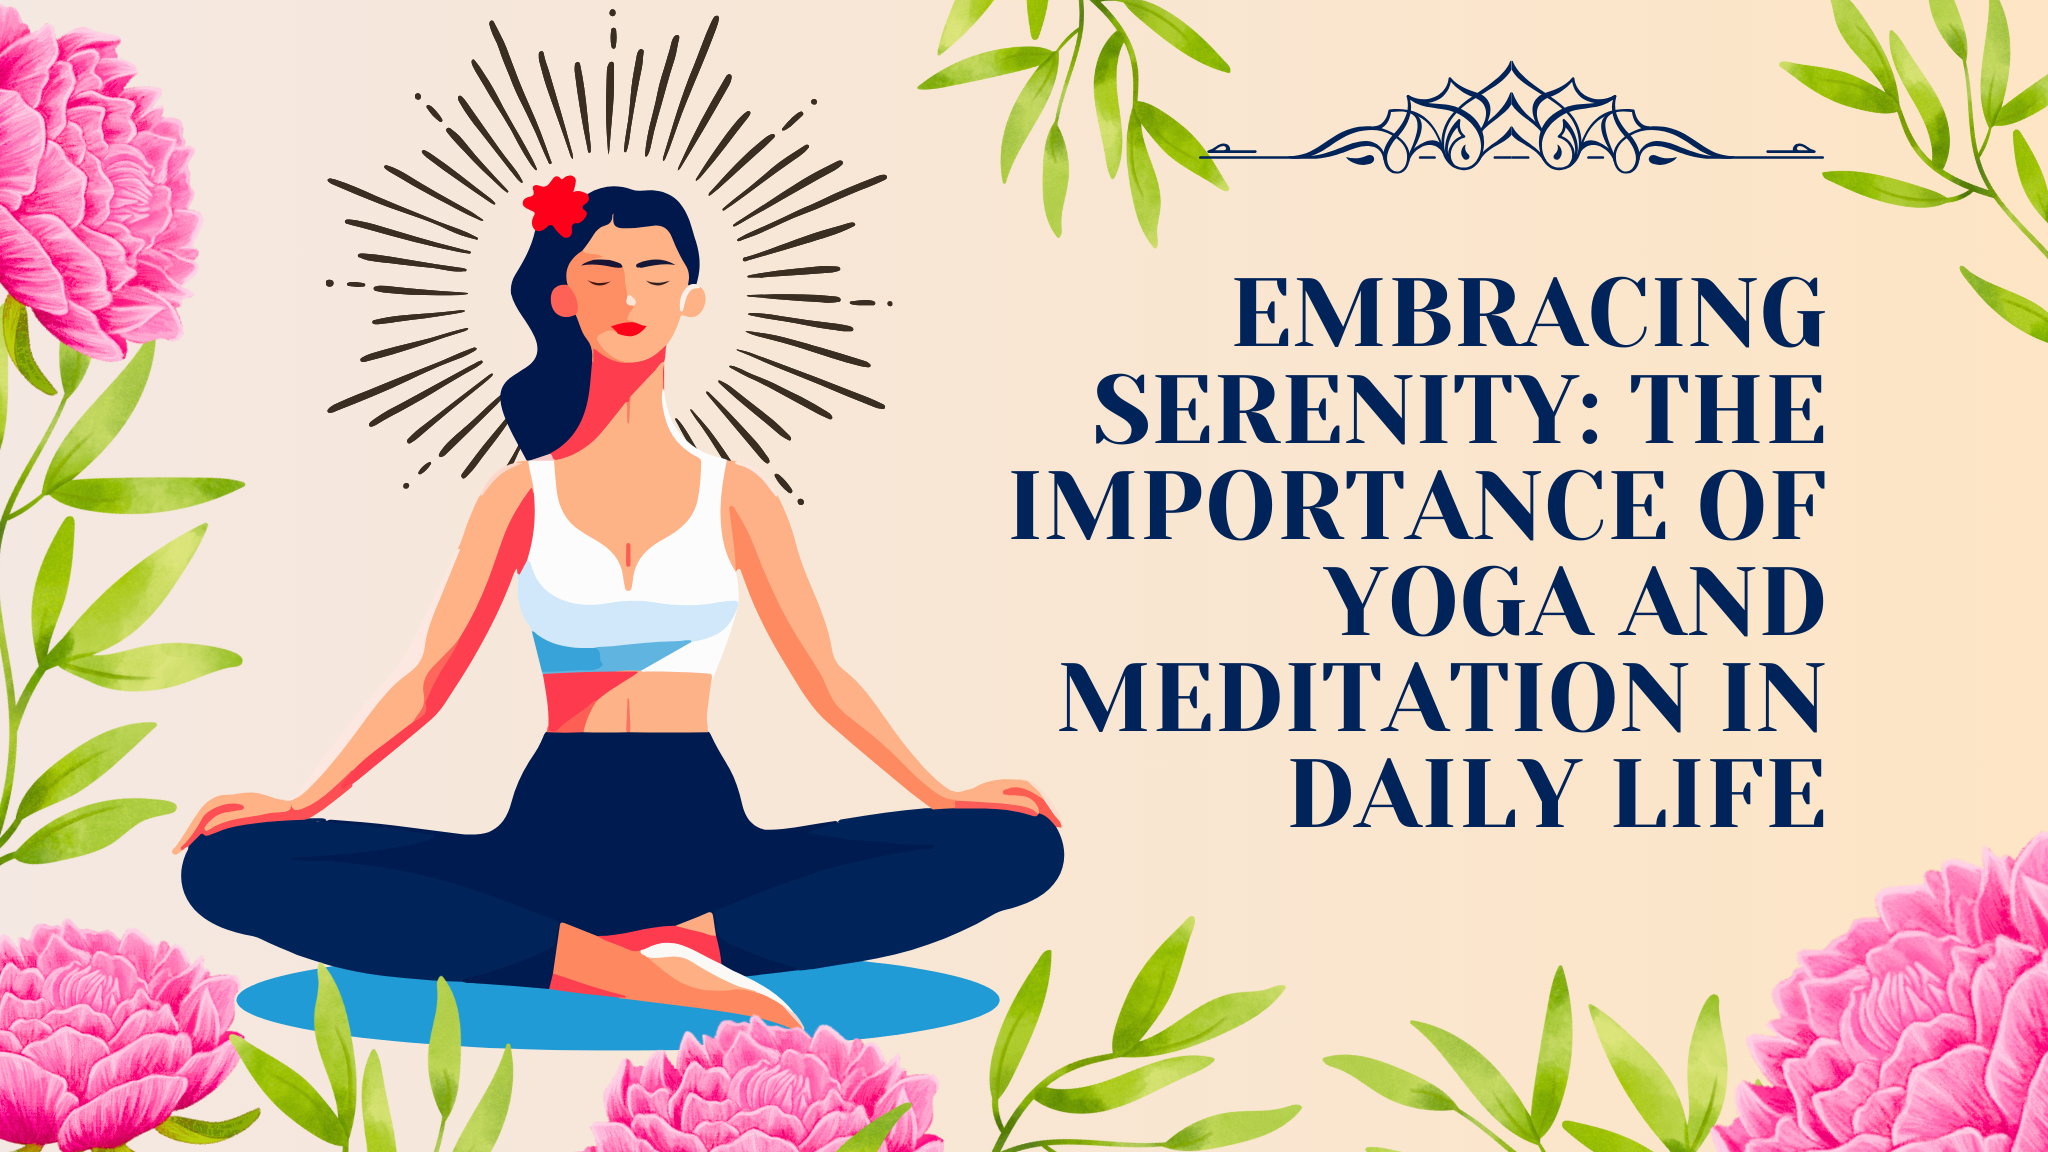 Embracing Serenity: The Importance of Yoga and Meditation in Daily Life